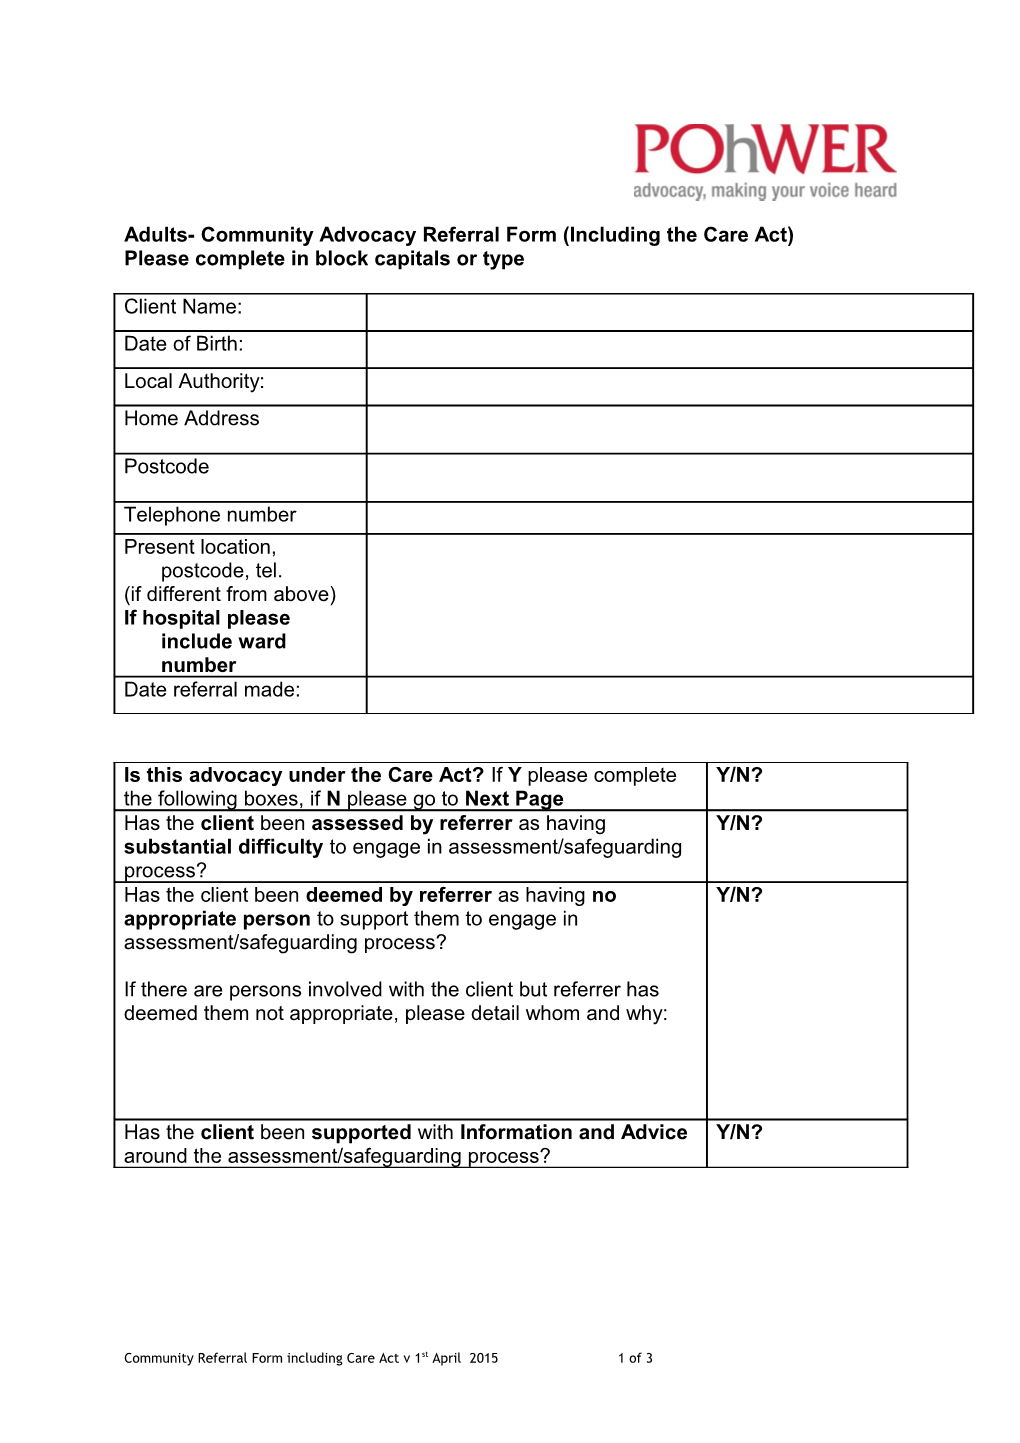 Adults- Community Advocacy Referral Form(Including the Care Act)